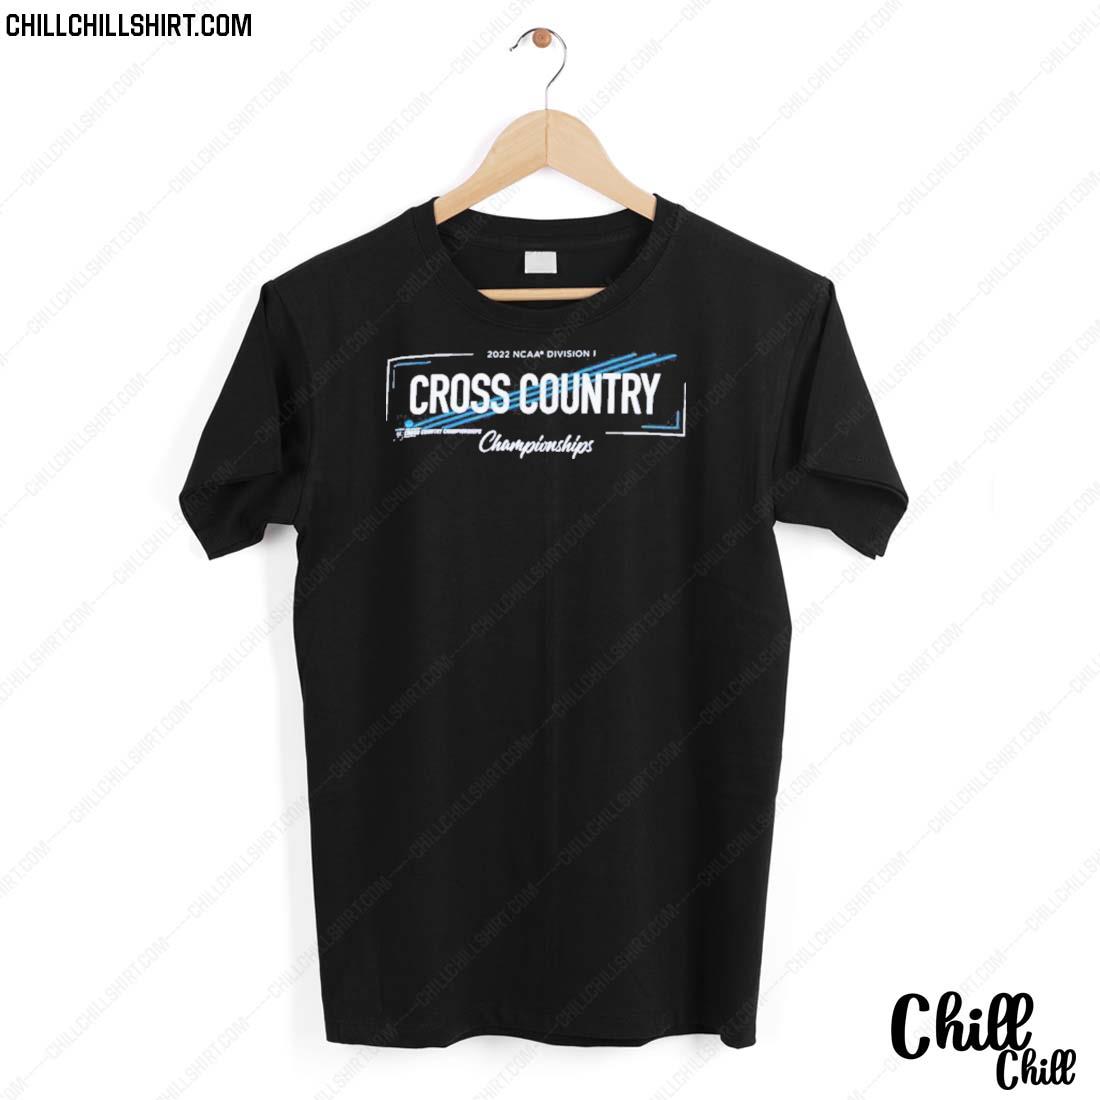 Nice division I Cross Country Championships Ncaa 2022 T-shirt